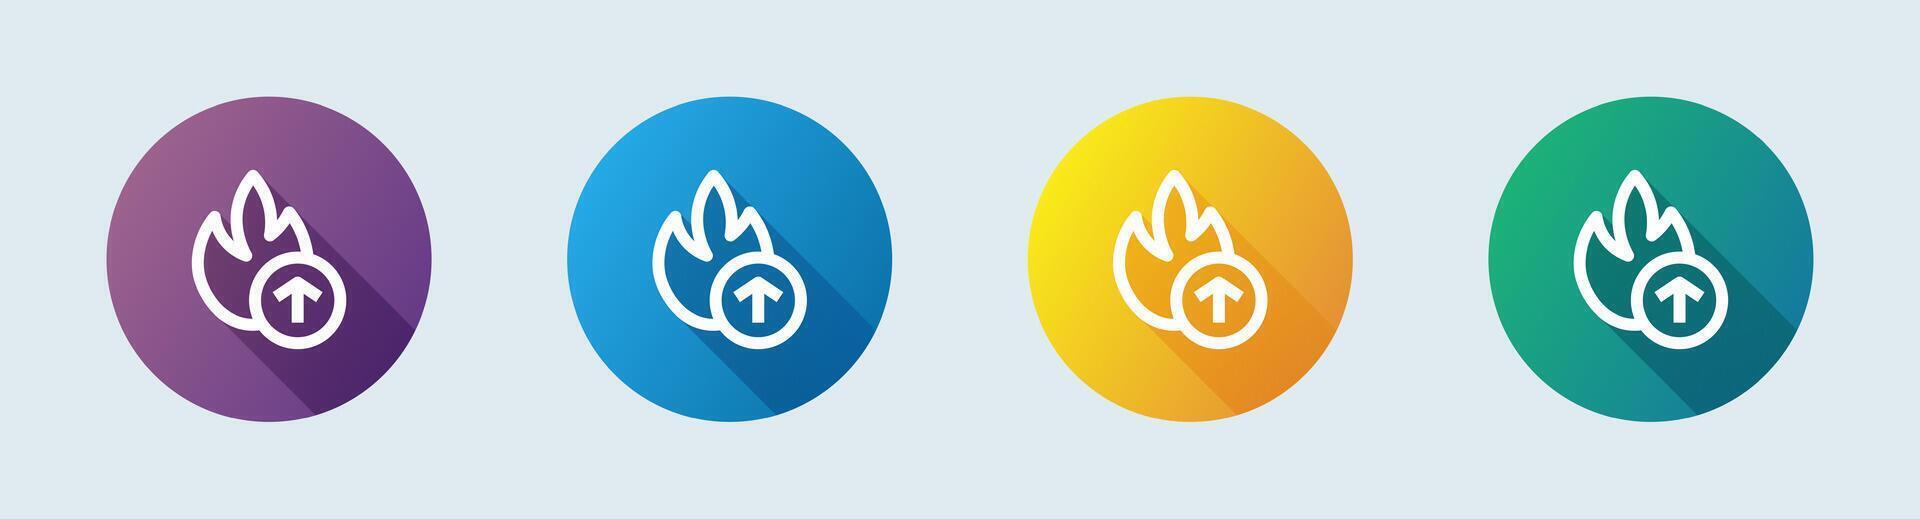 Viral line icon in flat design style. Flames signs vector illustration.